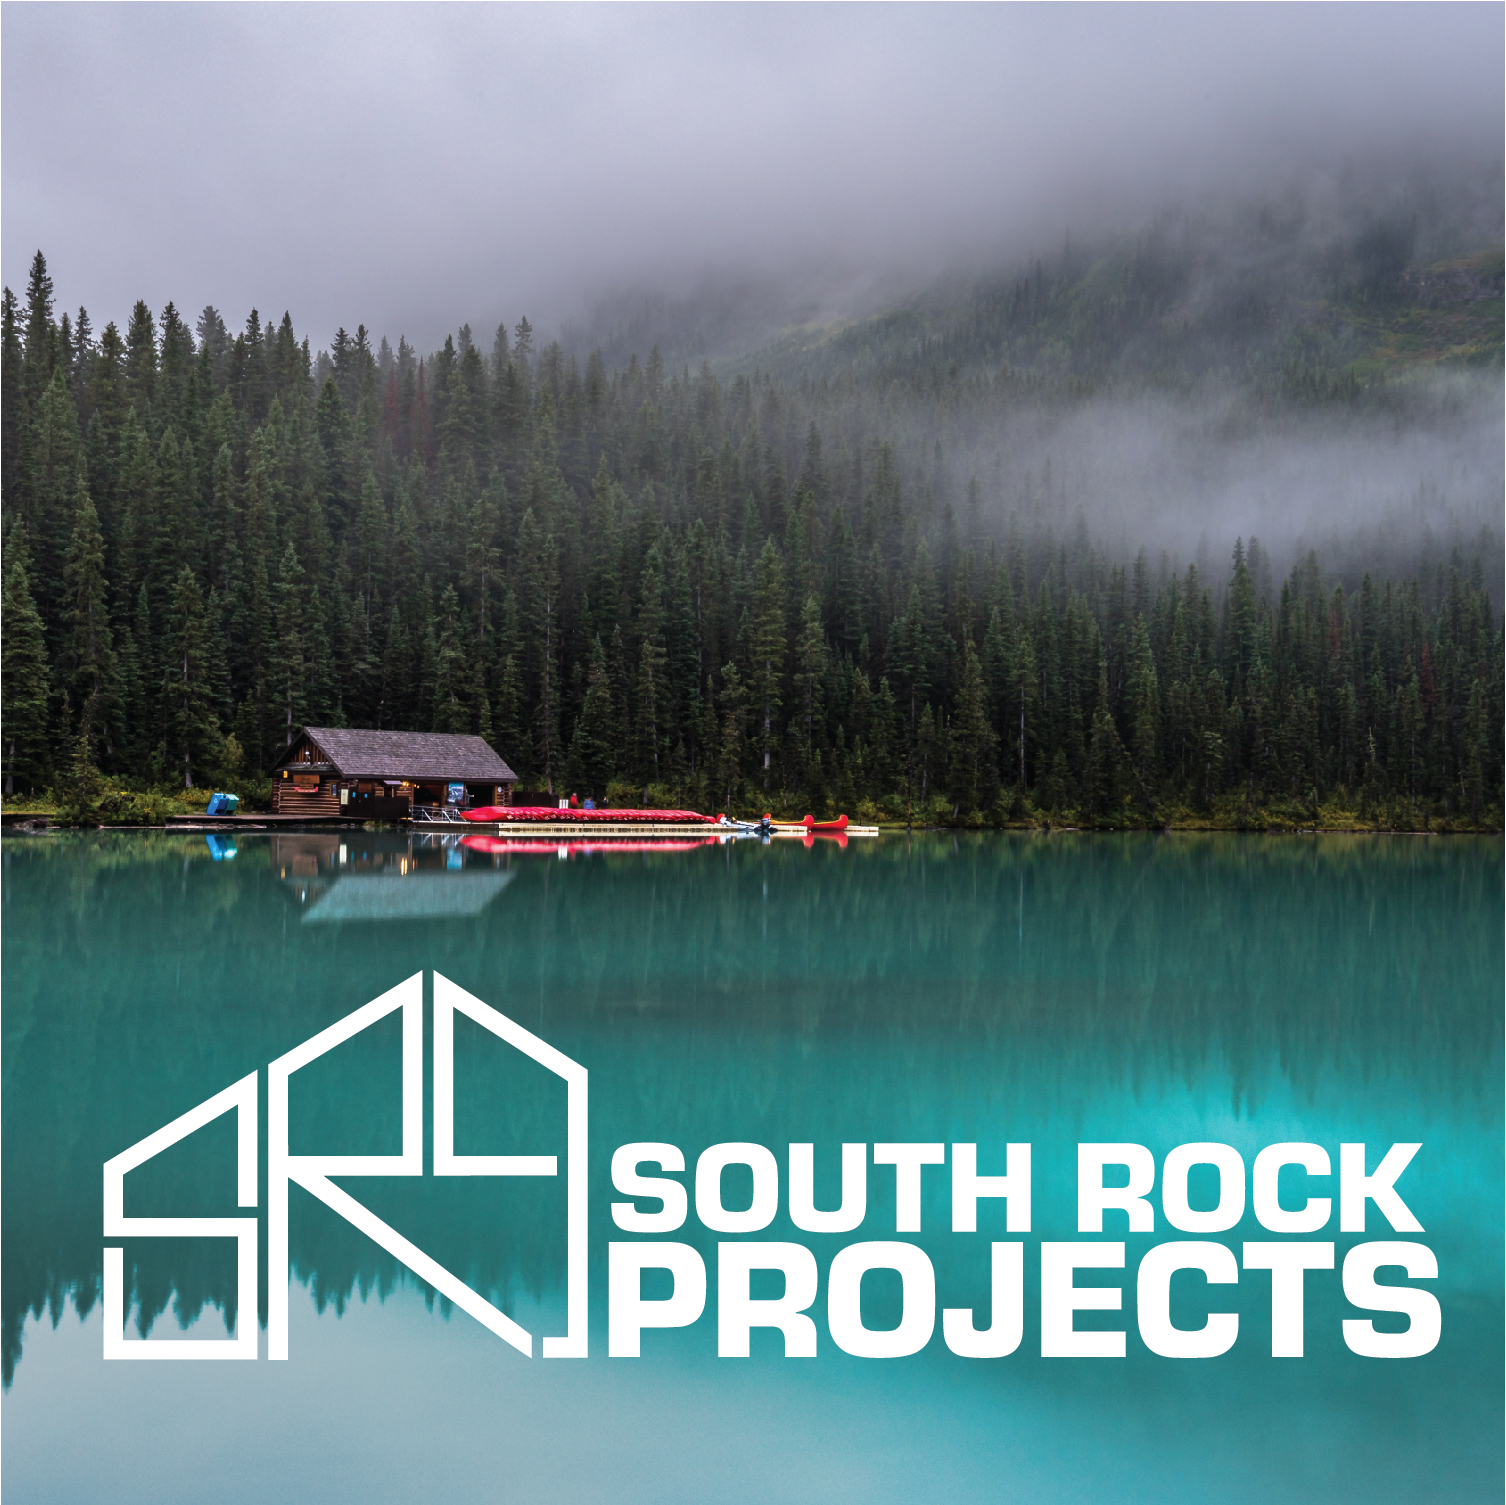 SOUTH ROCK PROJECTS by bl3nd design graphic design agency in abbotsford british columbia canada